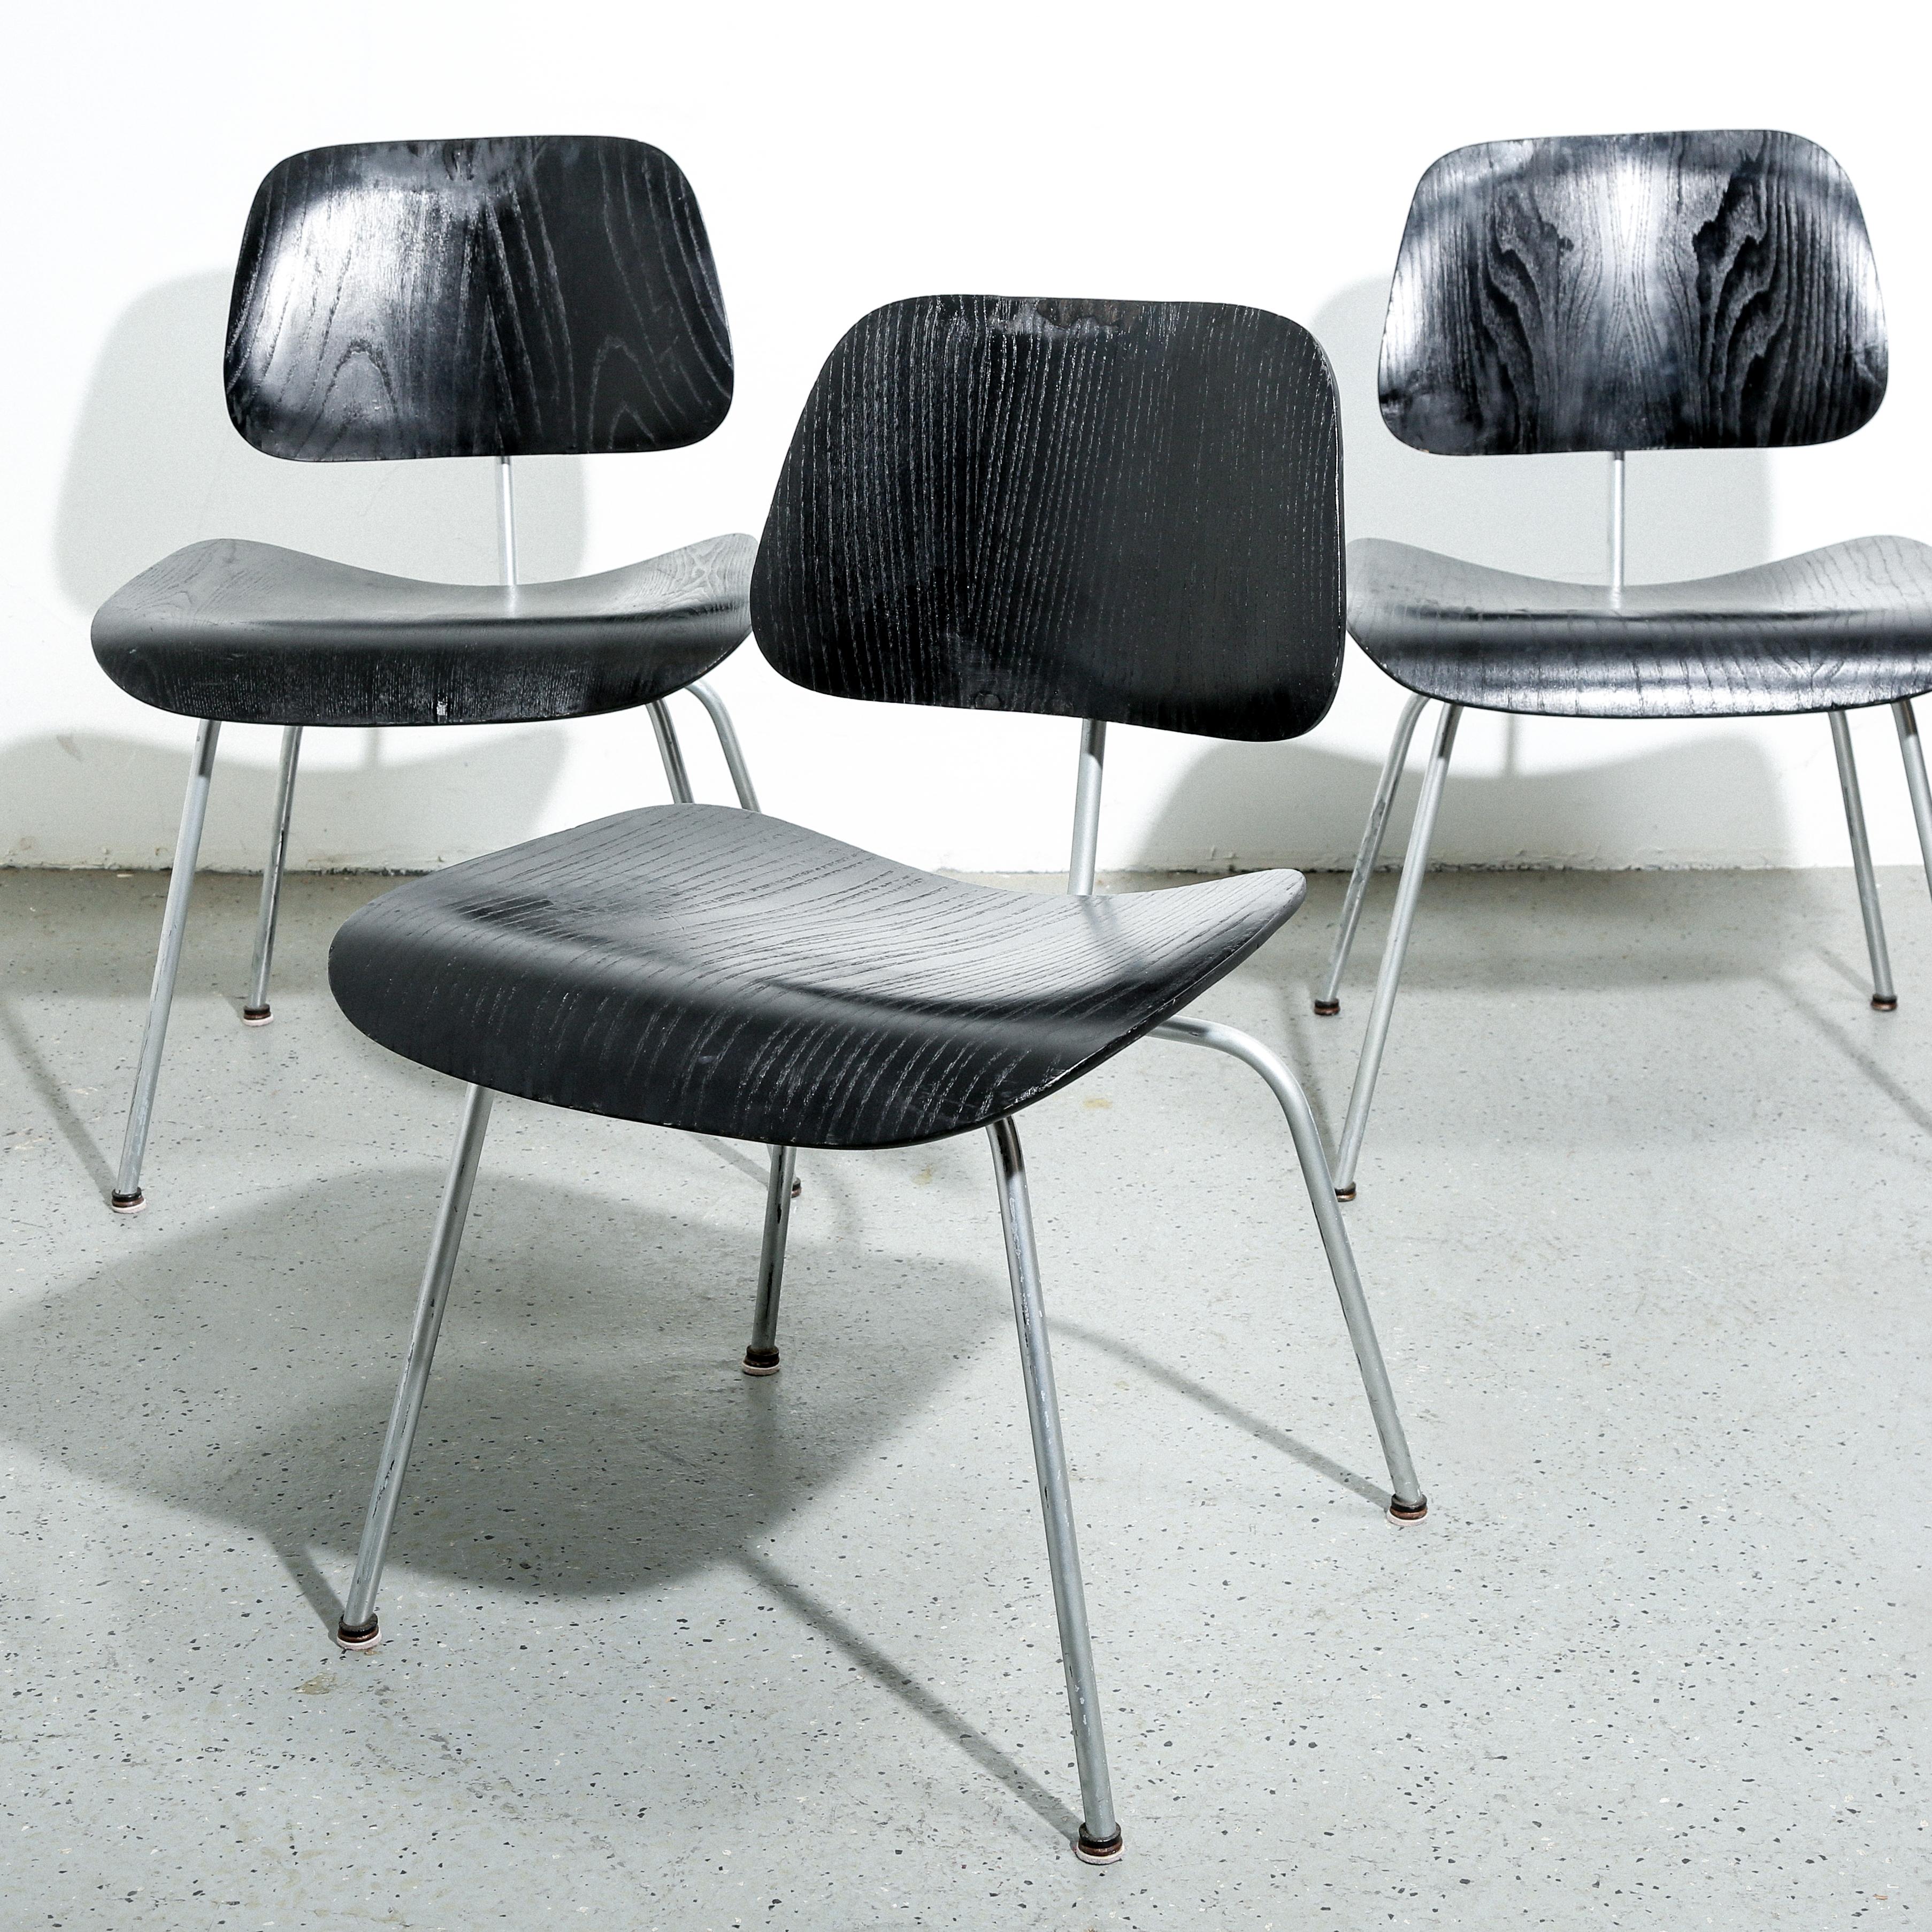 The Eames DCM (Dining Chair Metal) is a timeless piece of furniture design that epitomizes the marriage of form and function. Created by the legendary husband-and-wife design duo, Charles and Ray Eames, the DCM chair was first introduced in 1946 as